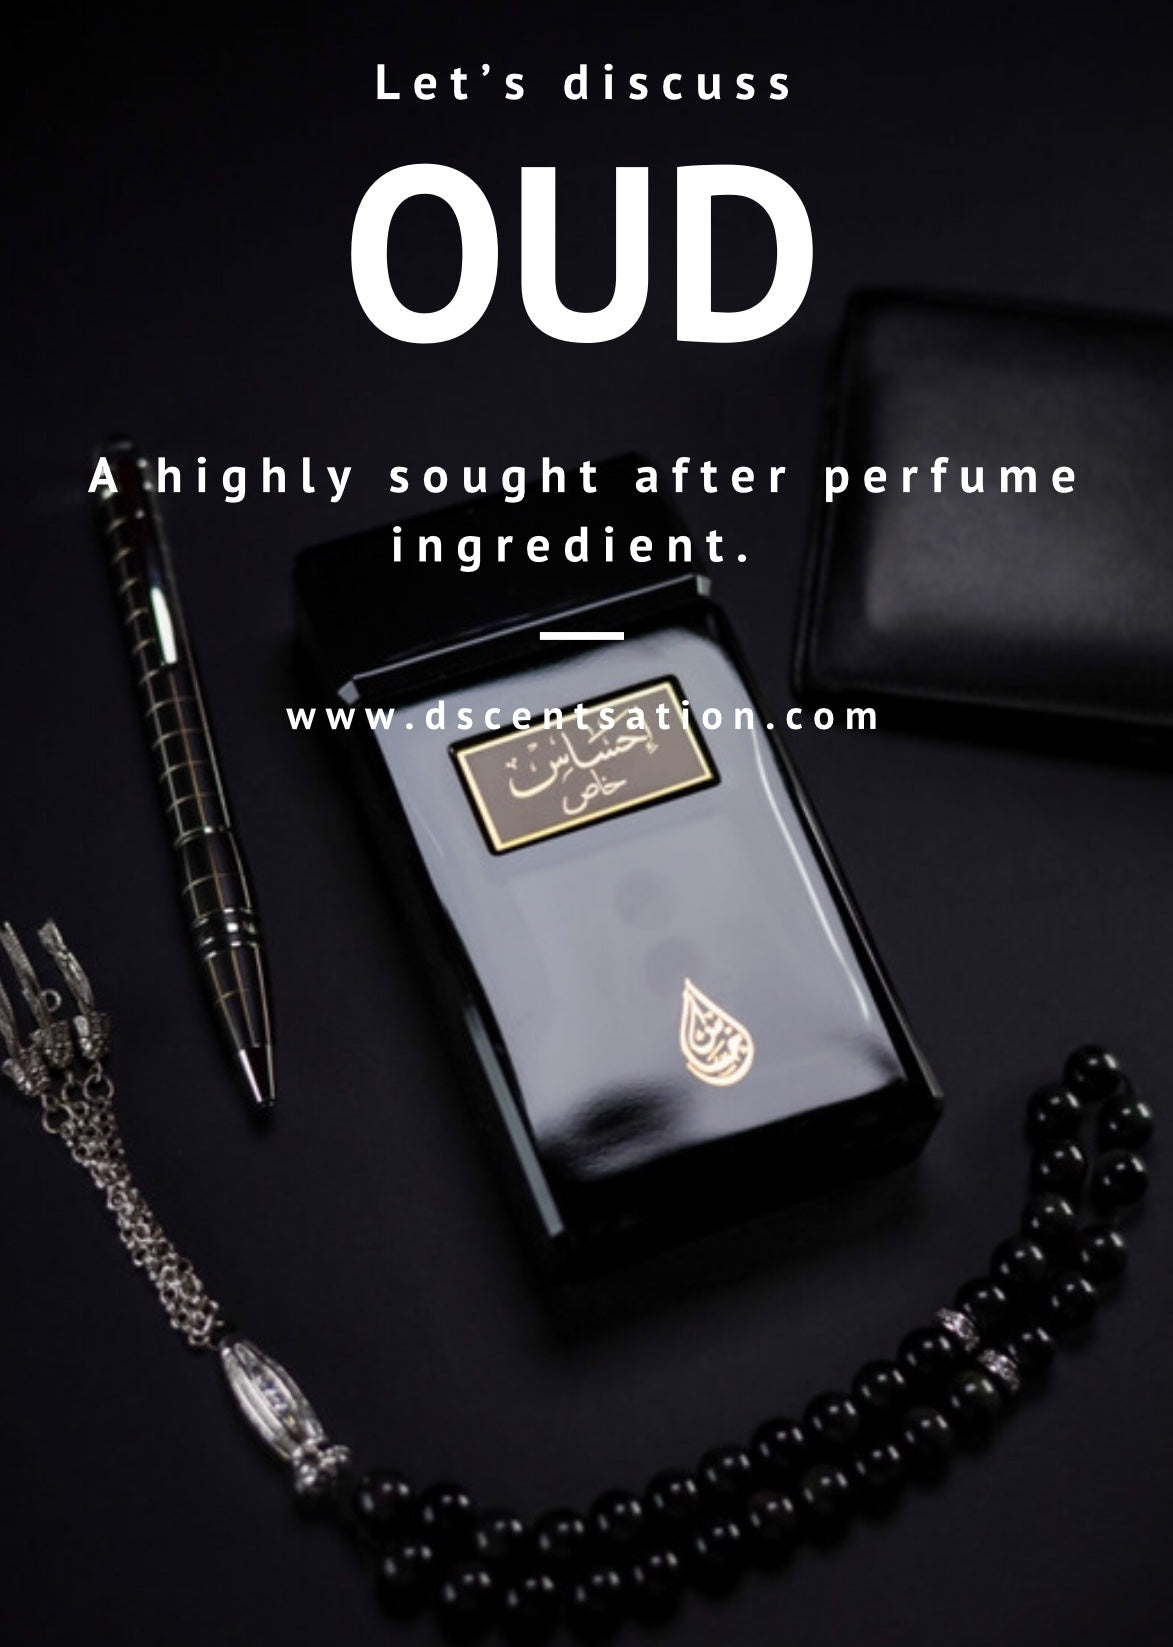 Let’s discuss Oud; a highly sought after perfume ingredient.